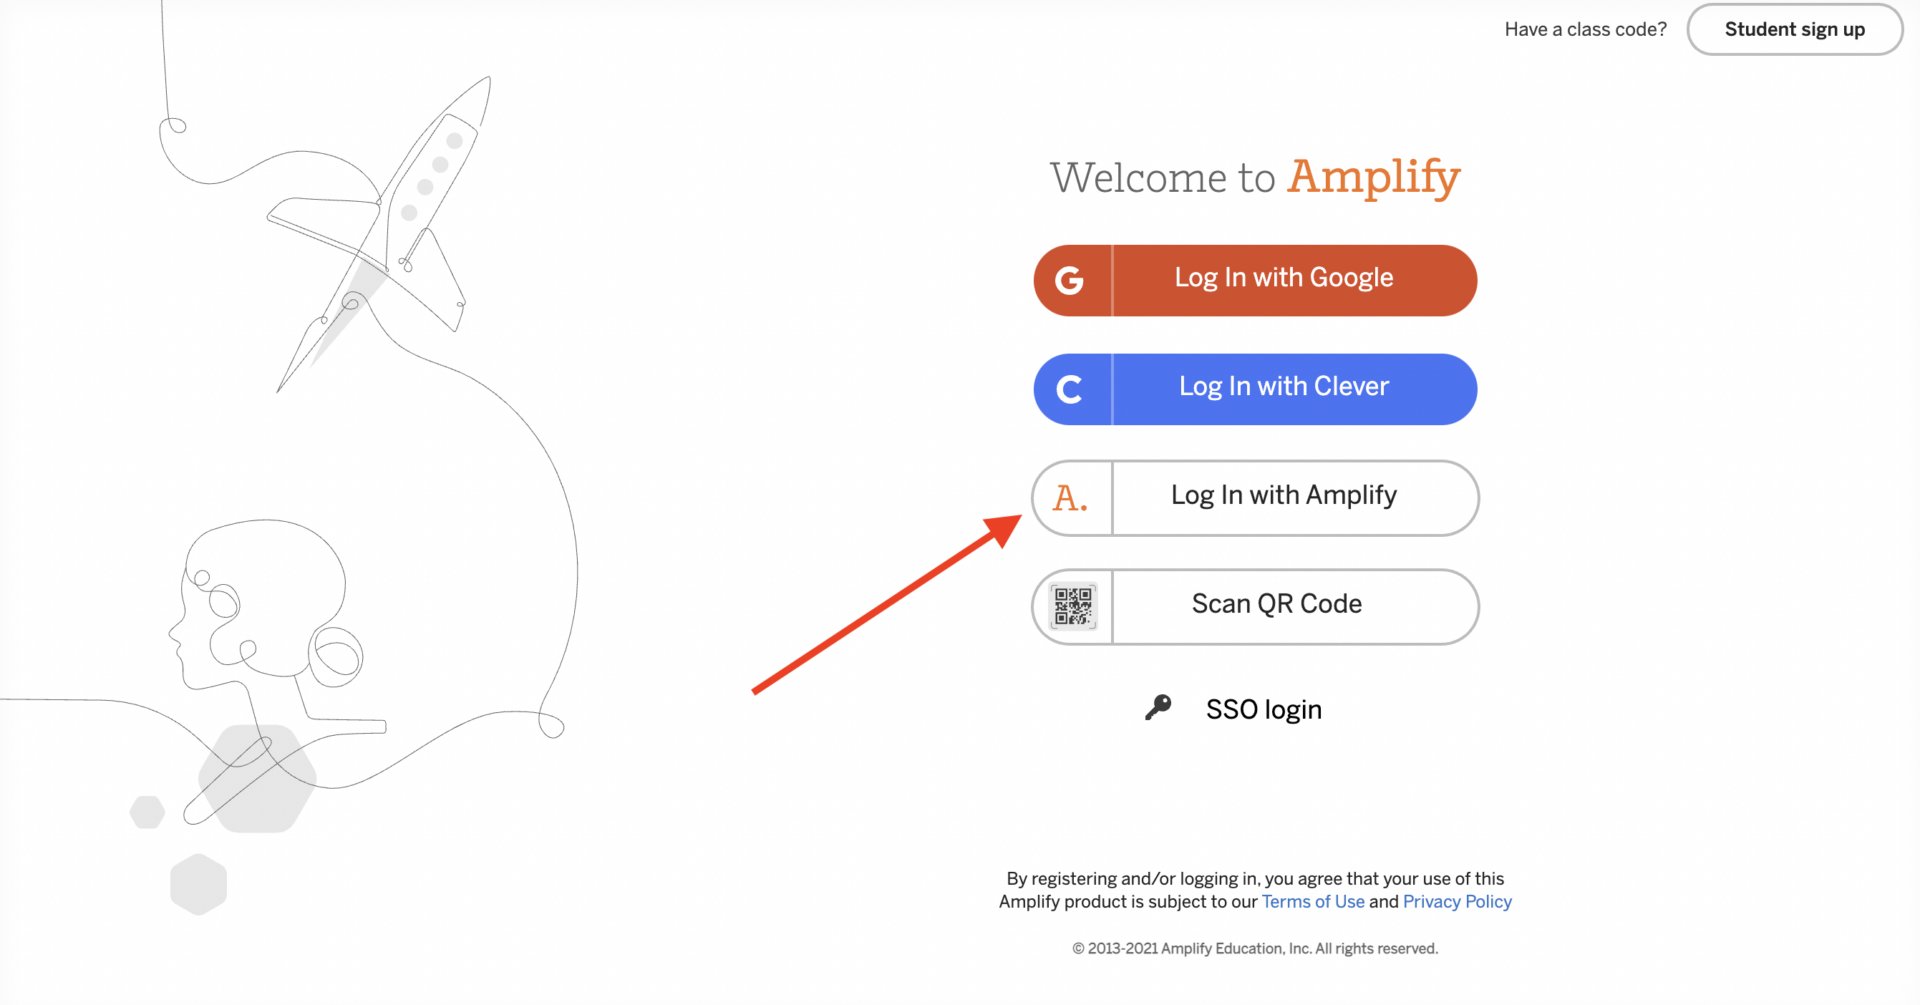 Screenshot of a login page with options to log in with google, clever, amplify, and a qr code, highlighted by a red arrow pointing at the 